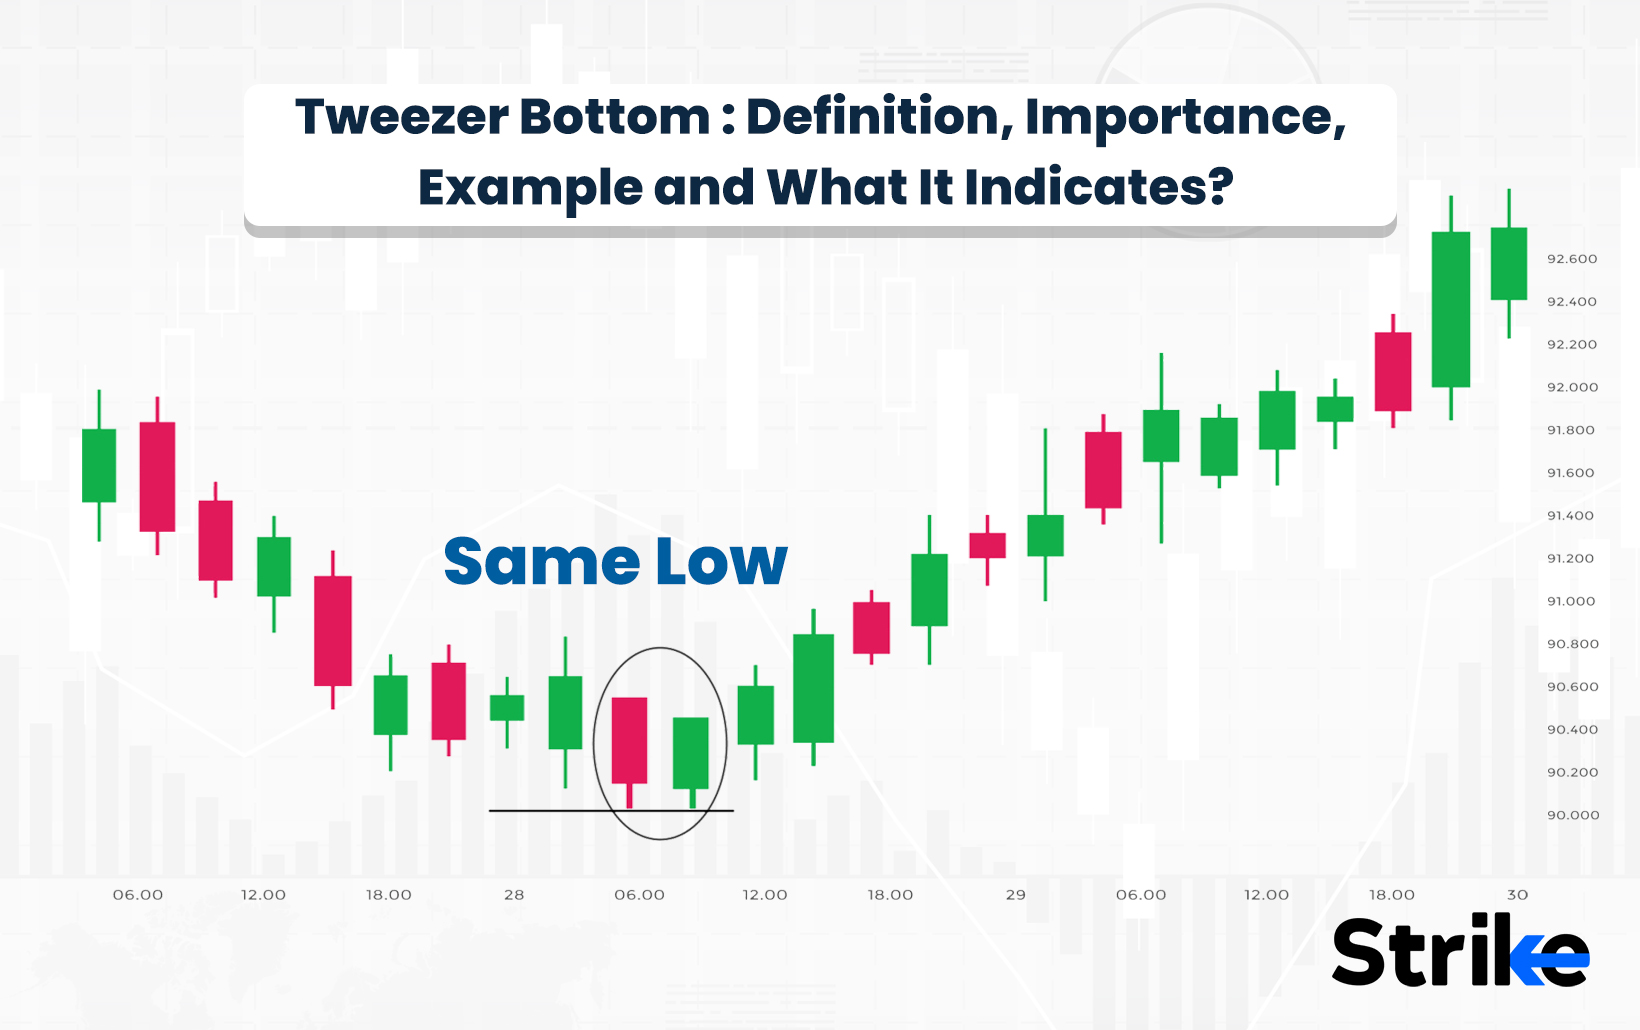 Tweezer Bottom: Definition, Importance, Example and What It Indicates?